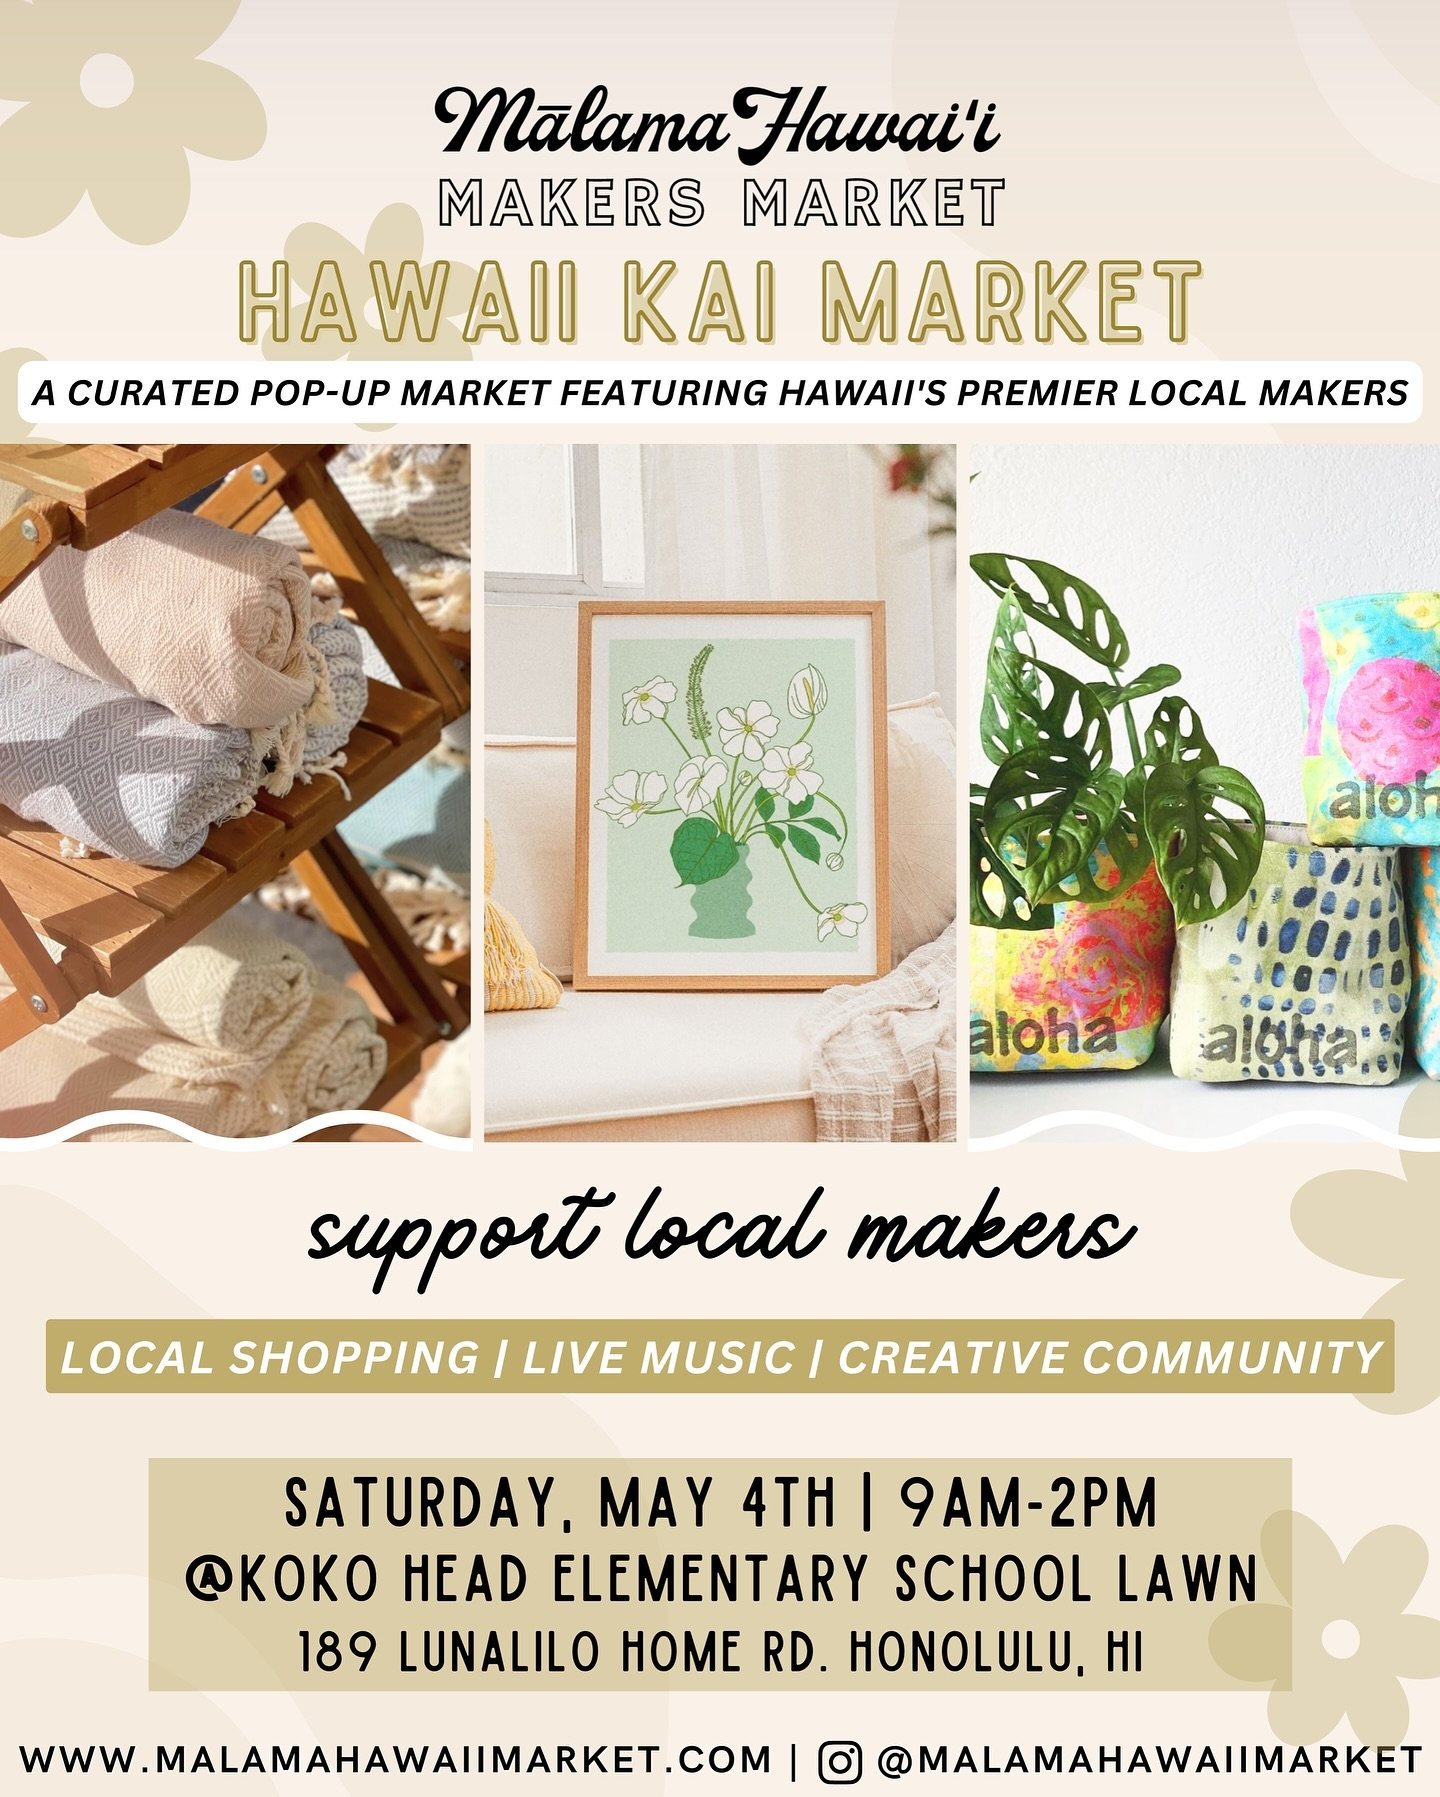 Our 🌴HAWAII KAI MARKET🌴 is up next &mdash; This Saturday, May 4th @ Koko Head Elementary School Lawn from 9am-2pm!

Discover our curated lineup of over 45 talented makers &amp; creators 〰️ showcasing high-quality, Hawaii-made goods! 🛍️

From super